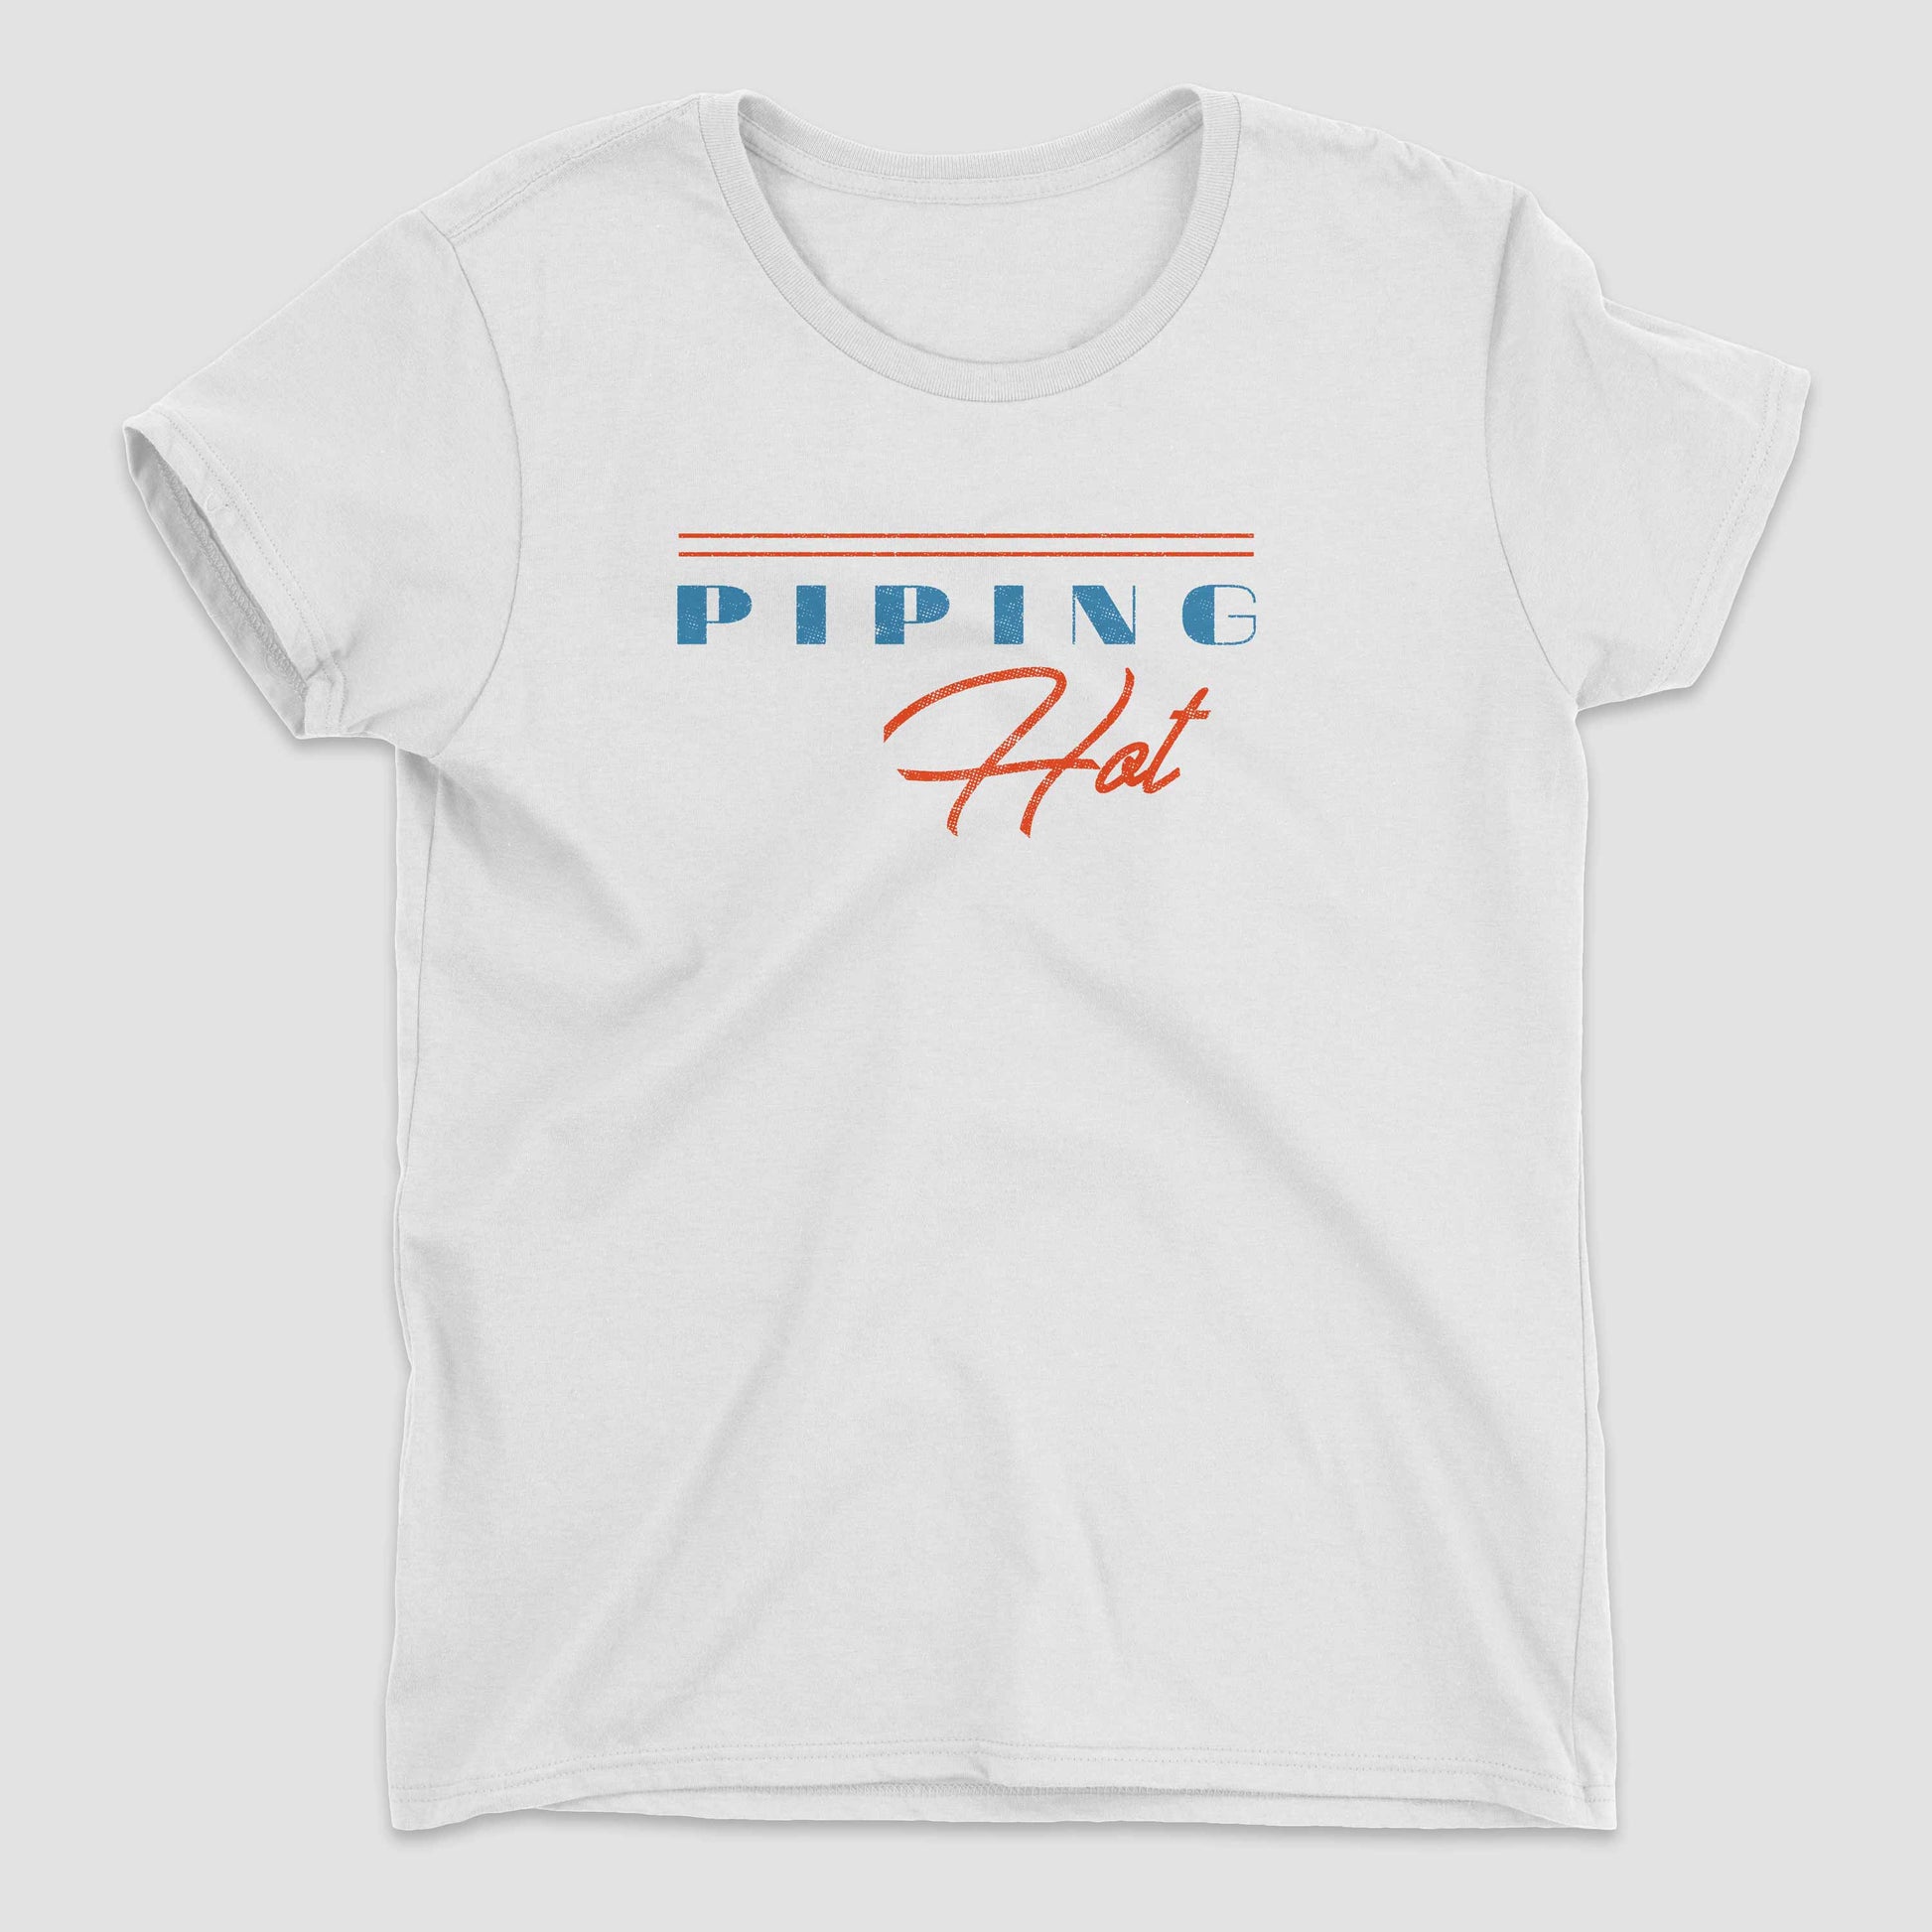 White Piping Hot Women's Graphic T-Shirt by Snaxtime